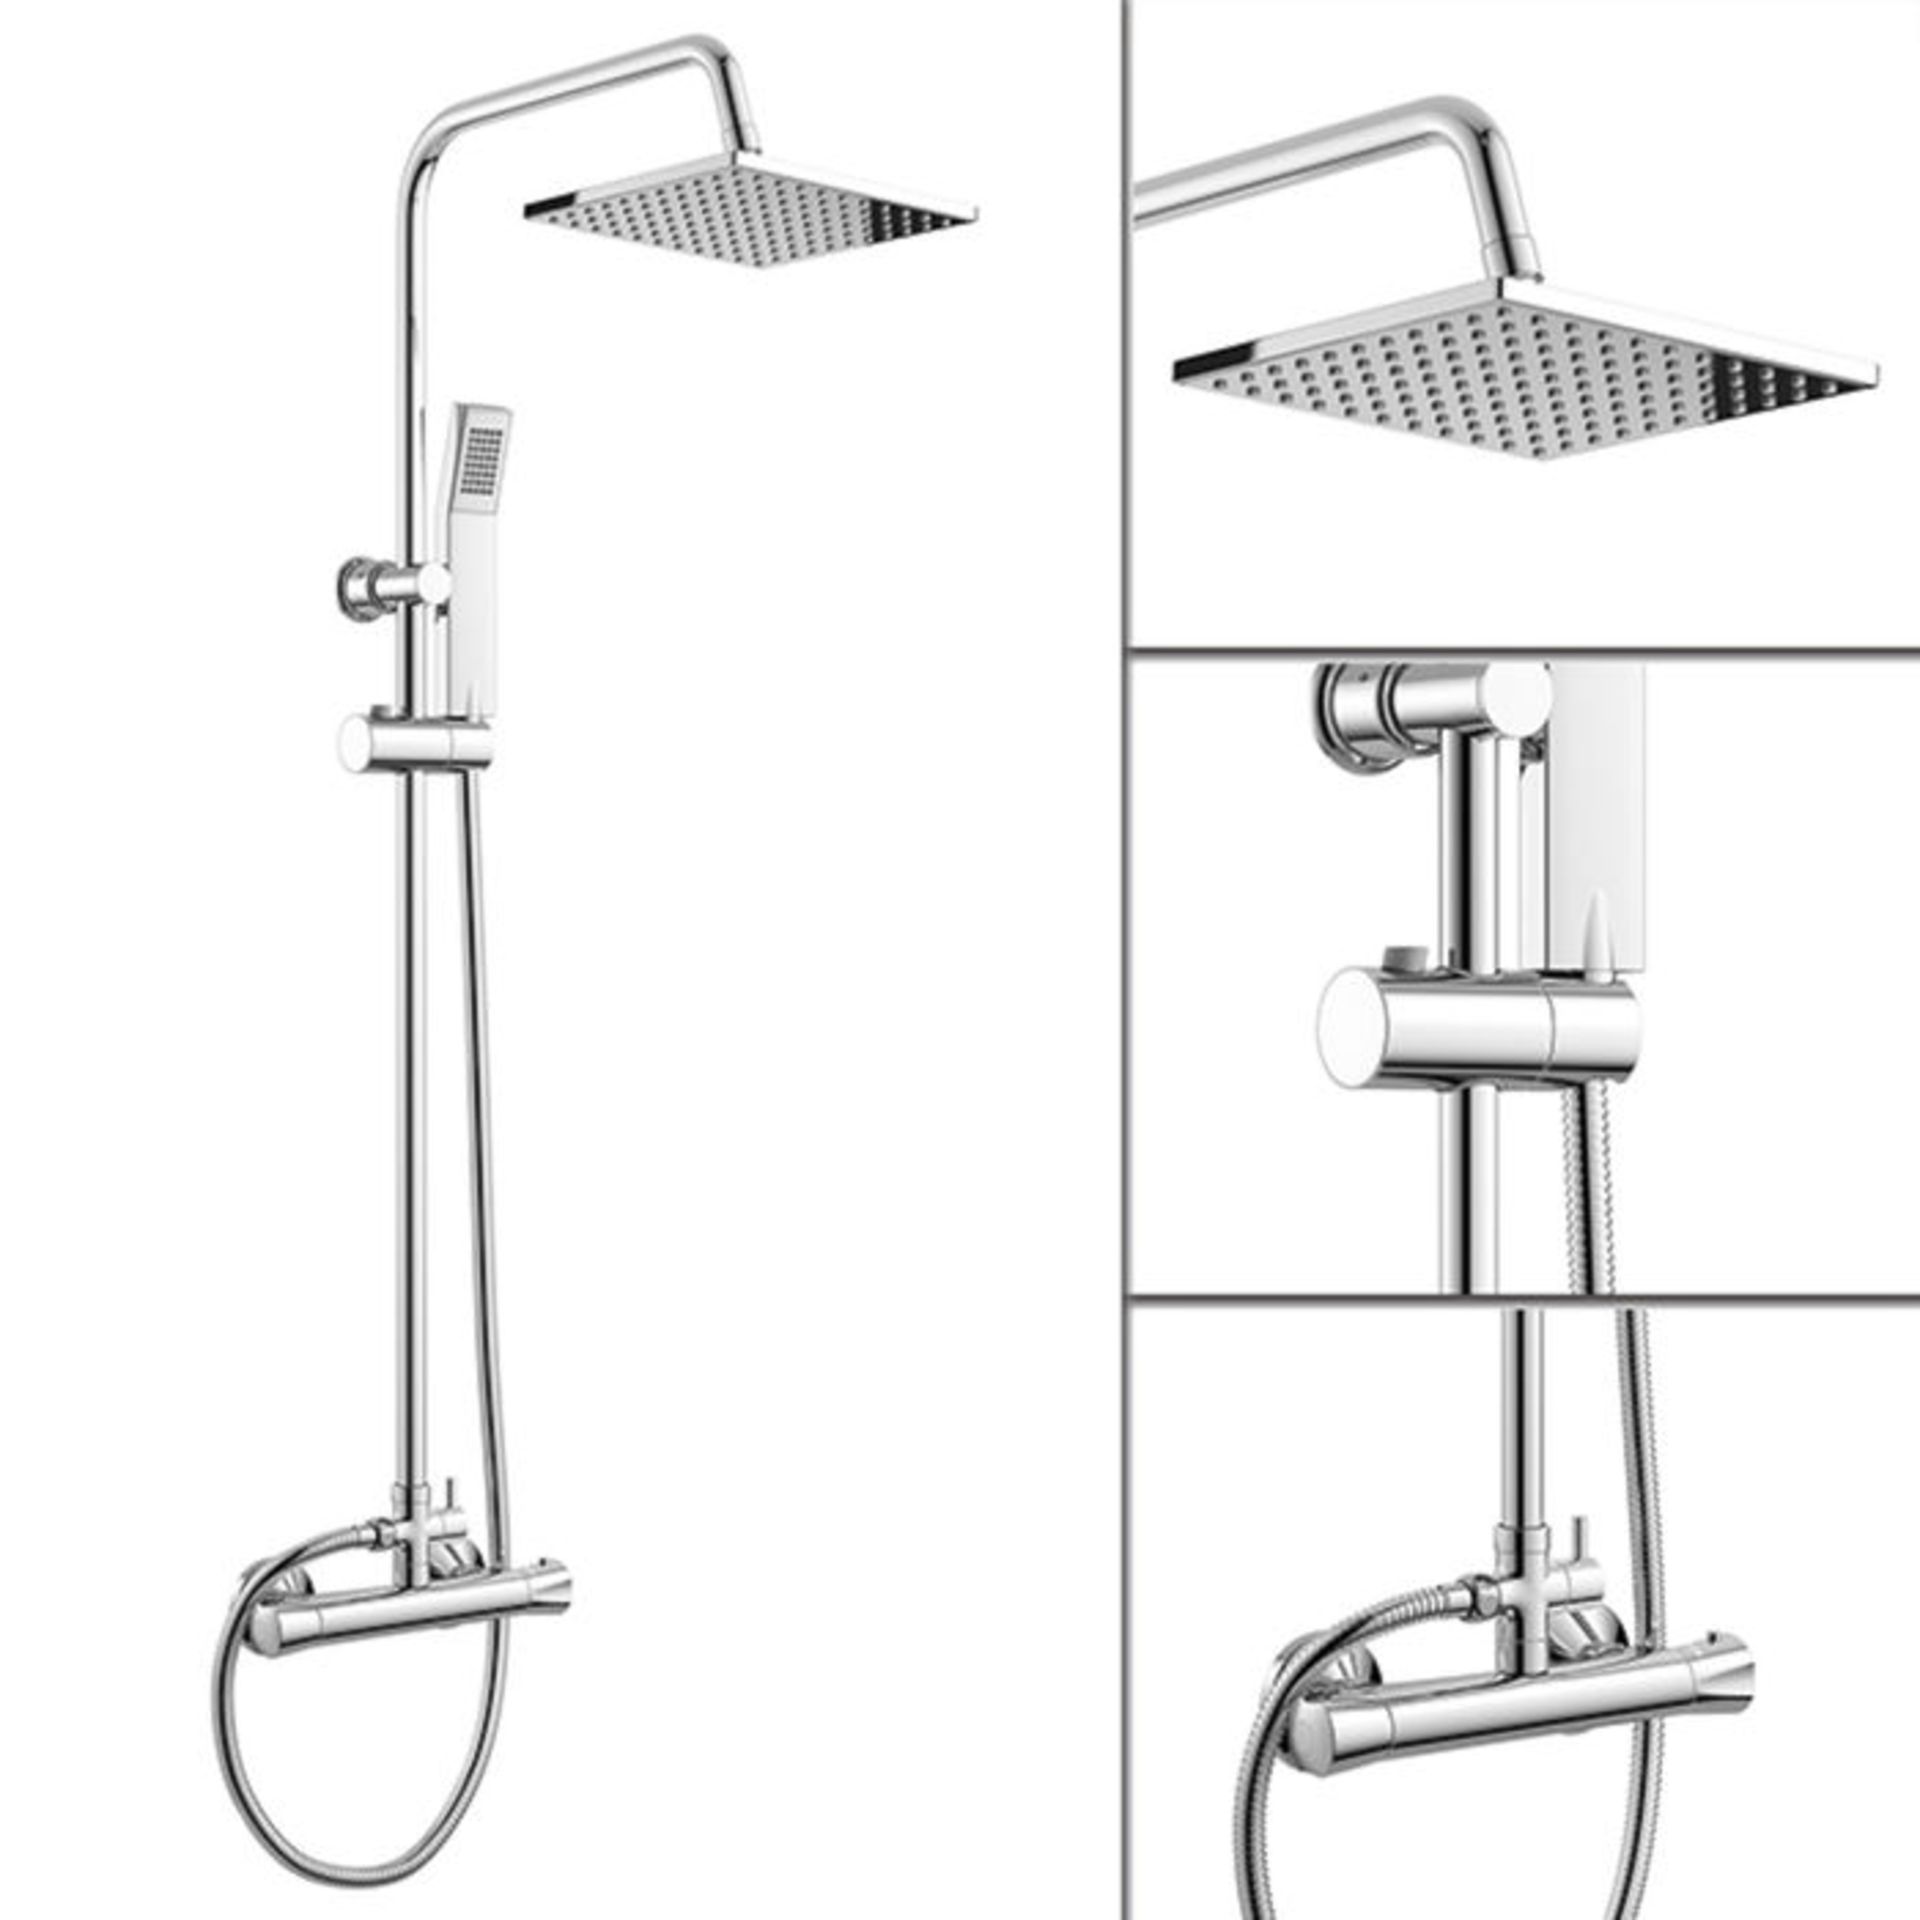 (RK124) Square Exposed Thermostatic Shower Kit & Head. Curved features and contemporary rounded... - Image 2 of 2